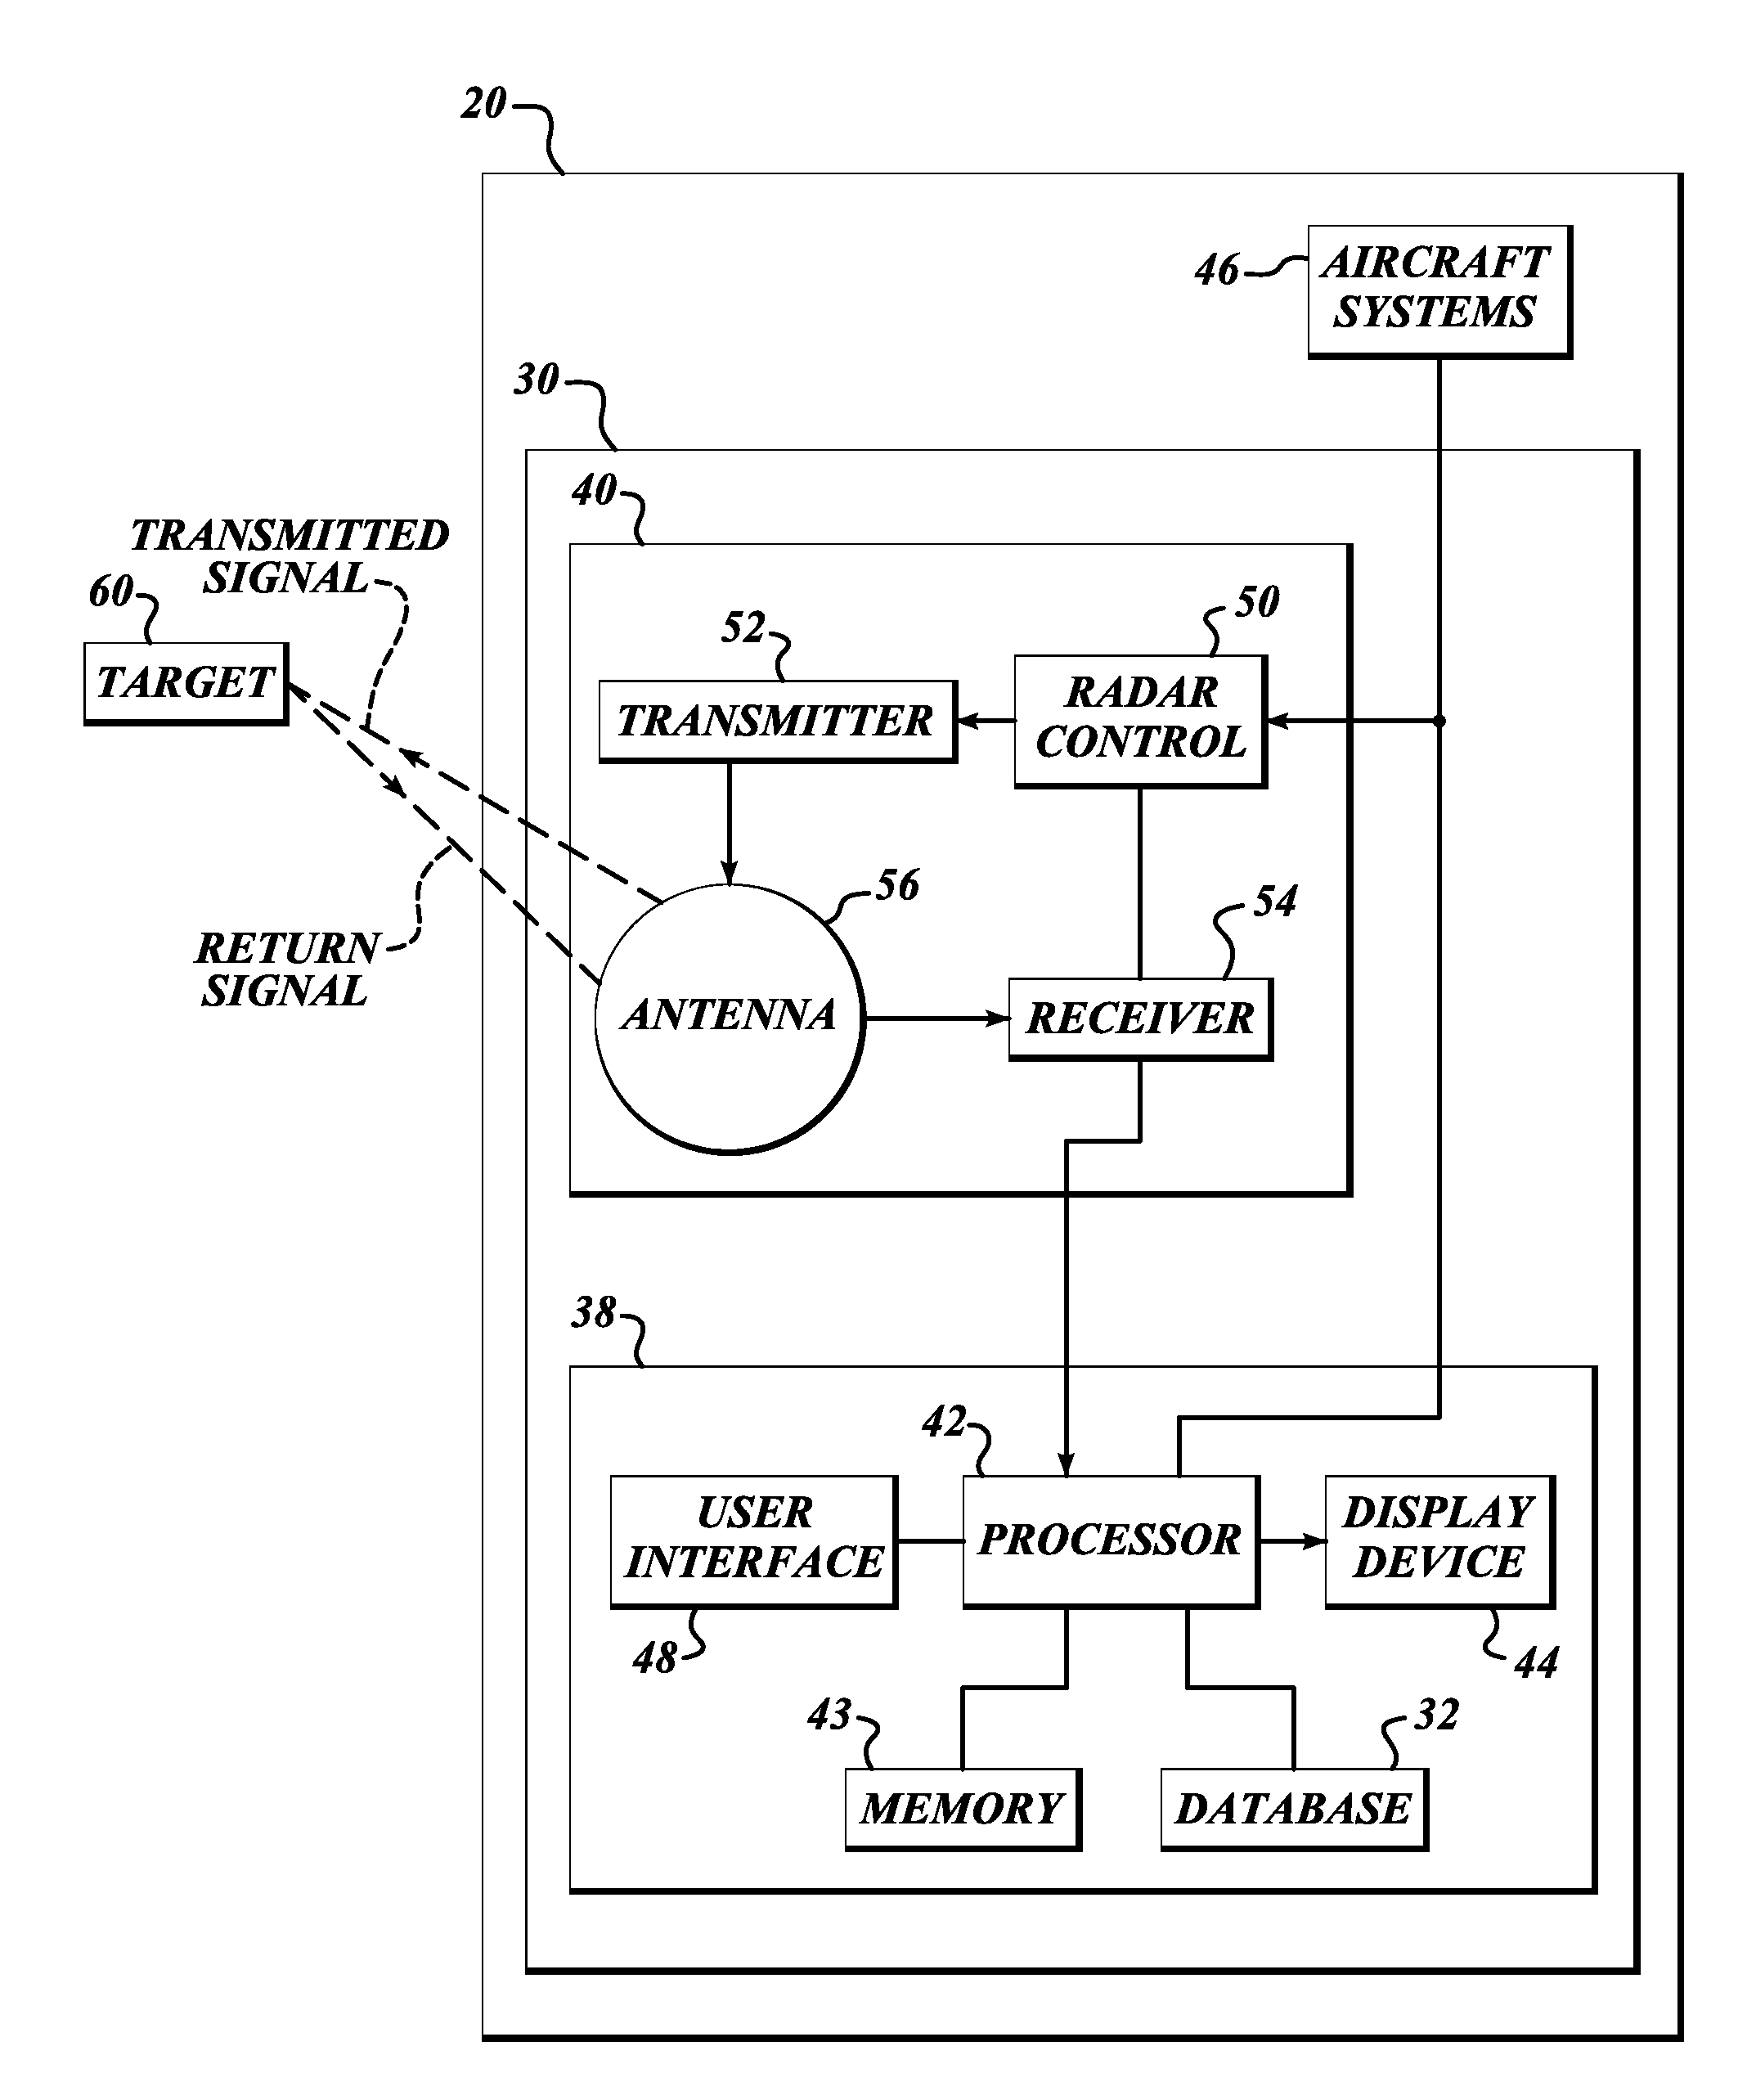 Systems and methods for infering hail and lightning using an airborne weather radar volumetric buffer